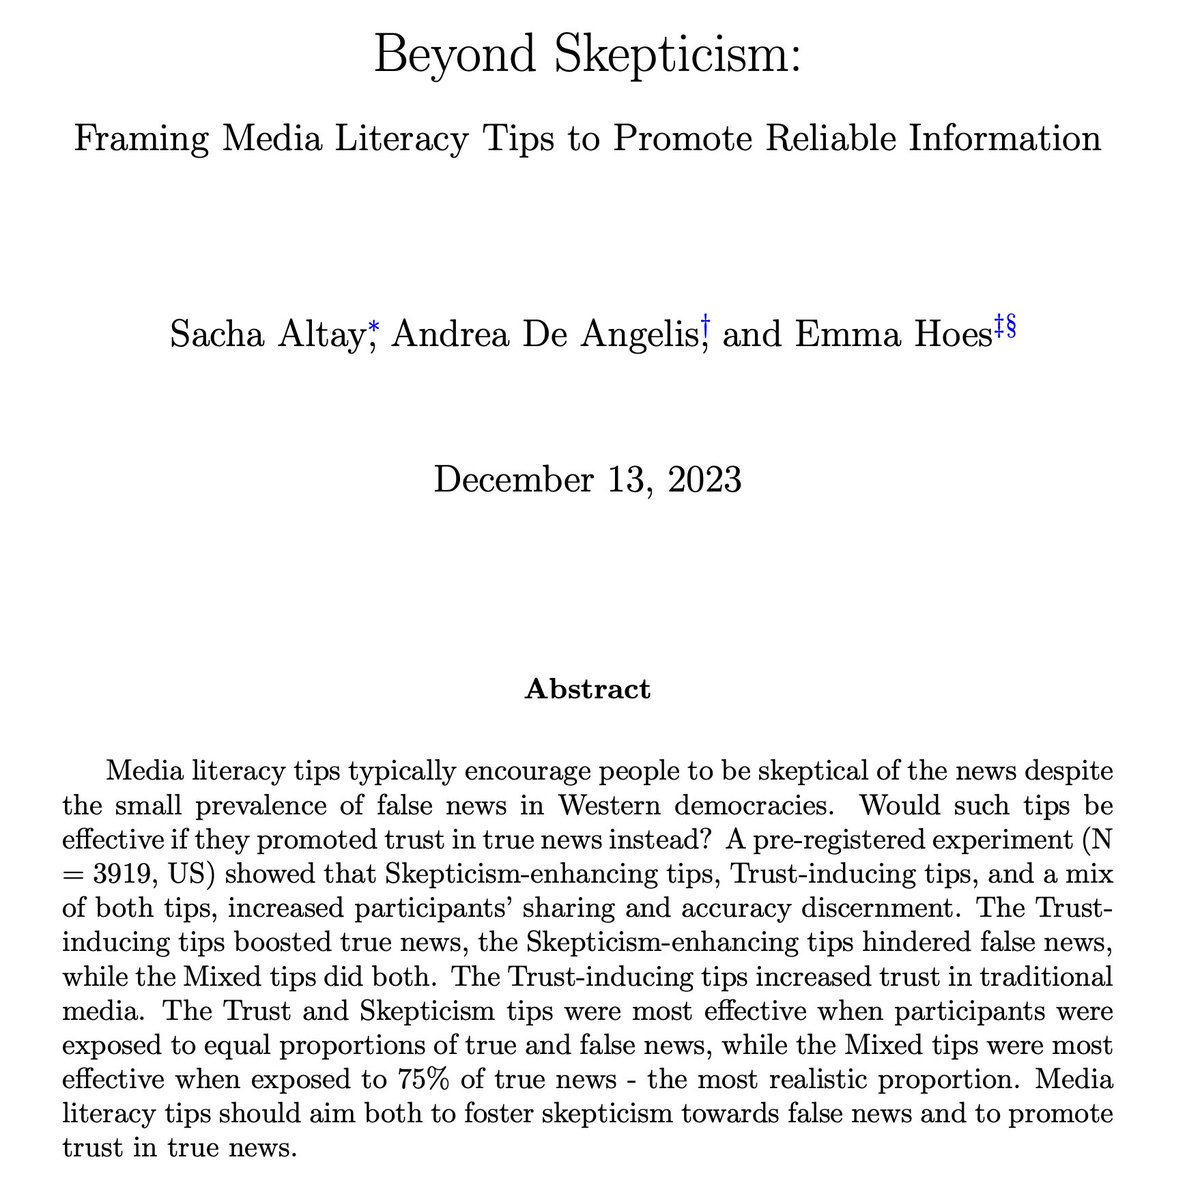 🚨 New paper 🚨 Media literacy tips typically encourage people to be skeptical of the news🧐 Would such tips be effective if they promoted trust in the news instead? And does the proportion of true/false news matter when estimating these effects? 👉 osf.io/preprints/psya…